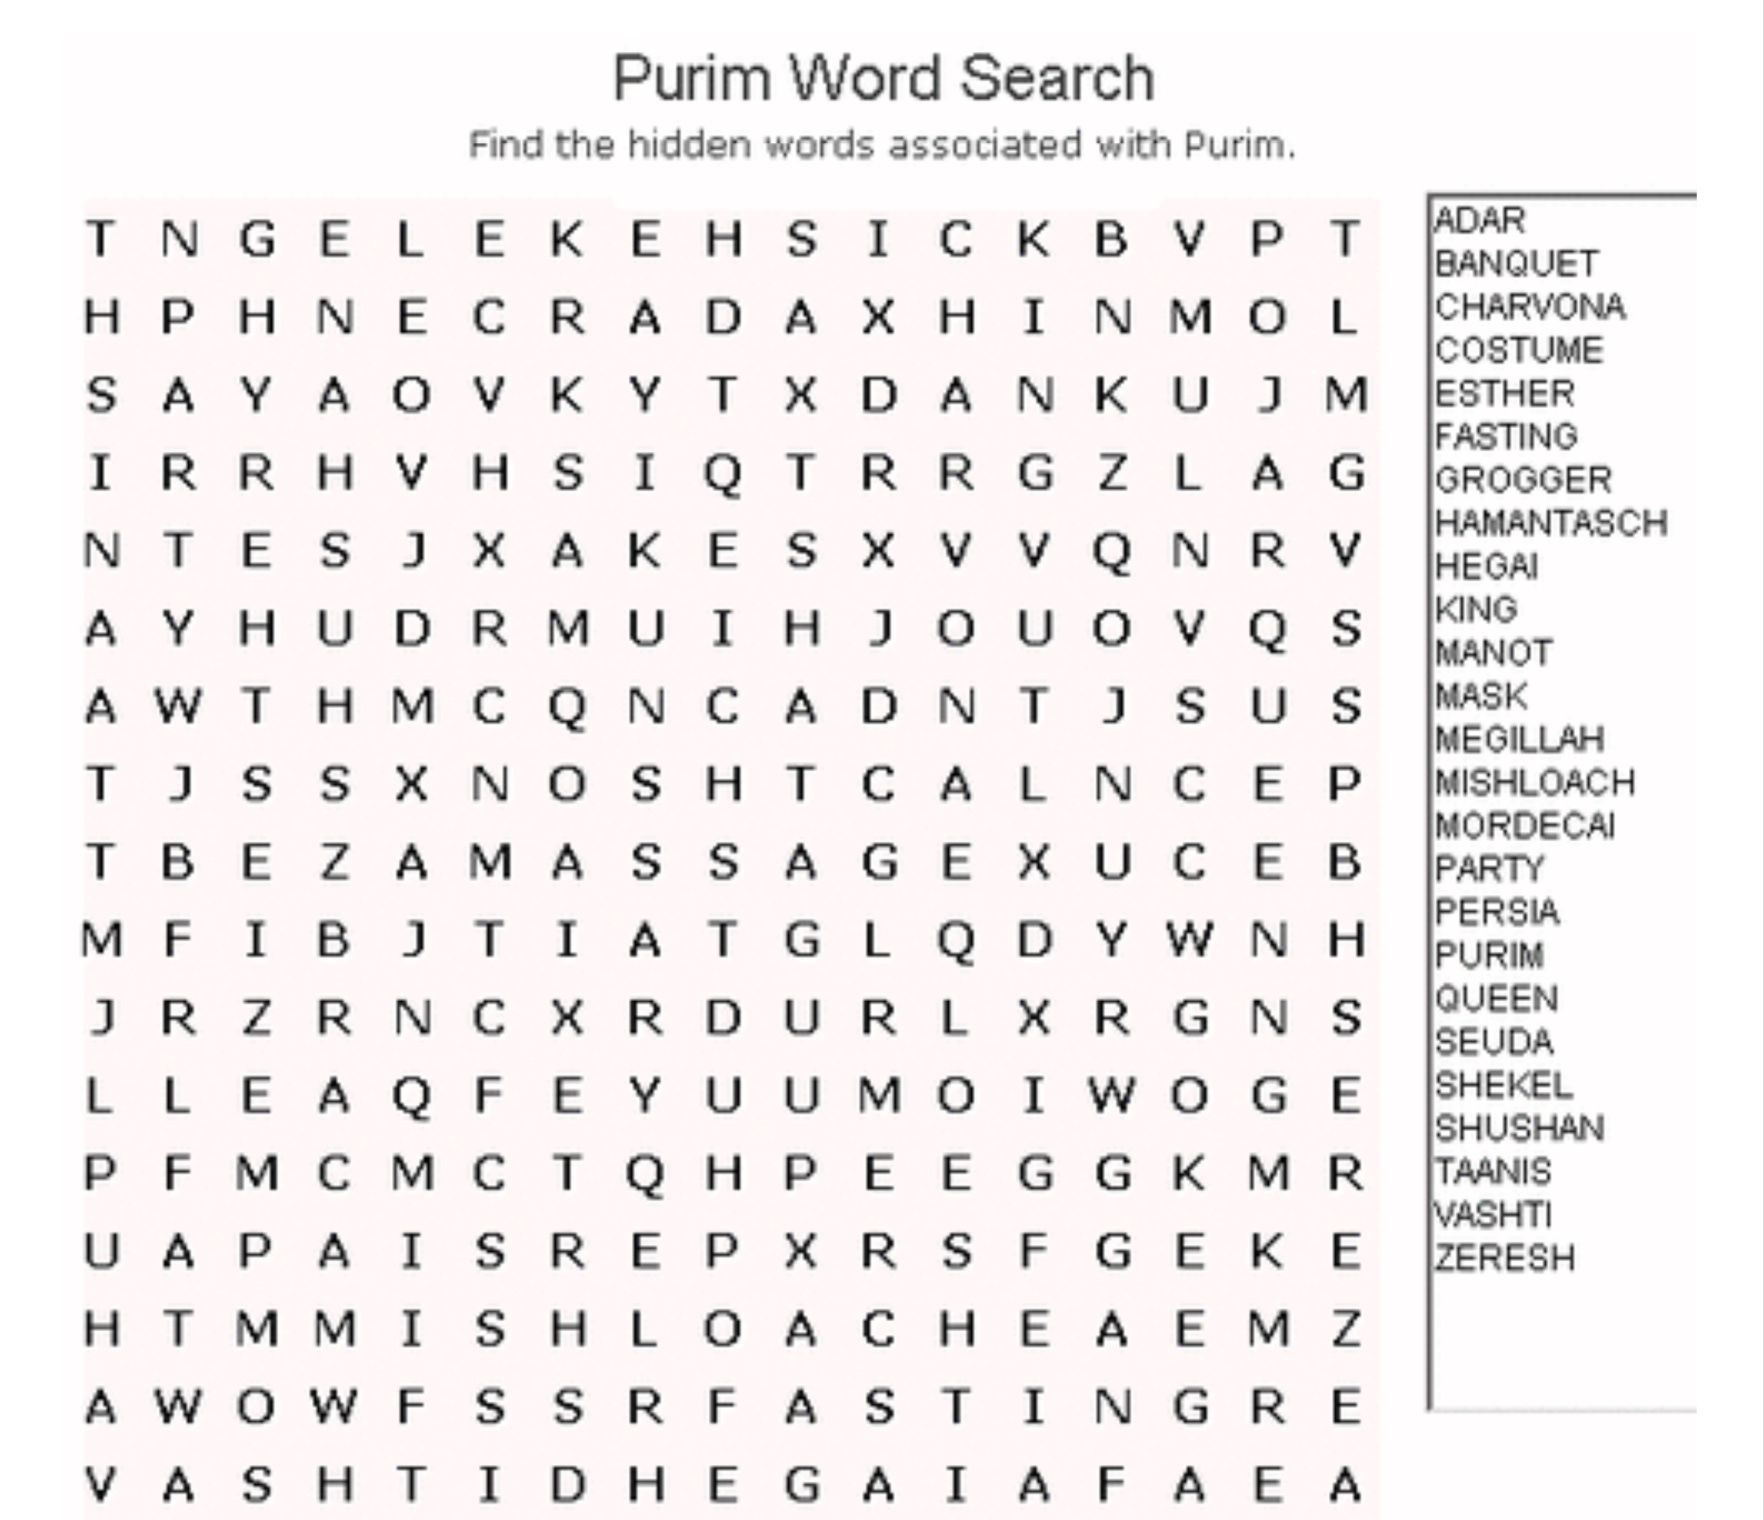 Purim Word Search | Kitah Dalet | Word Search Puzzles, Crossword - Free Printable General Knowledge Crossword Puzzles